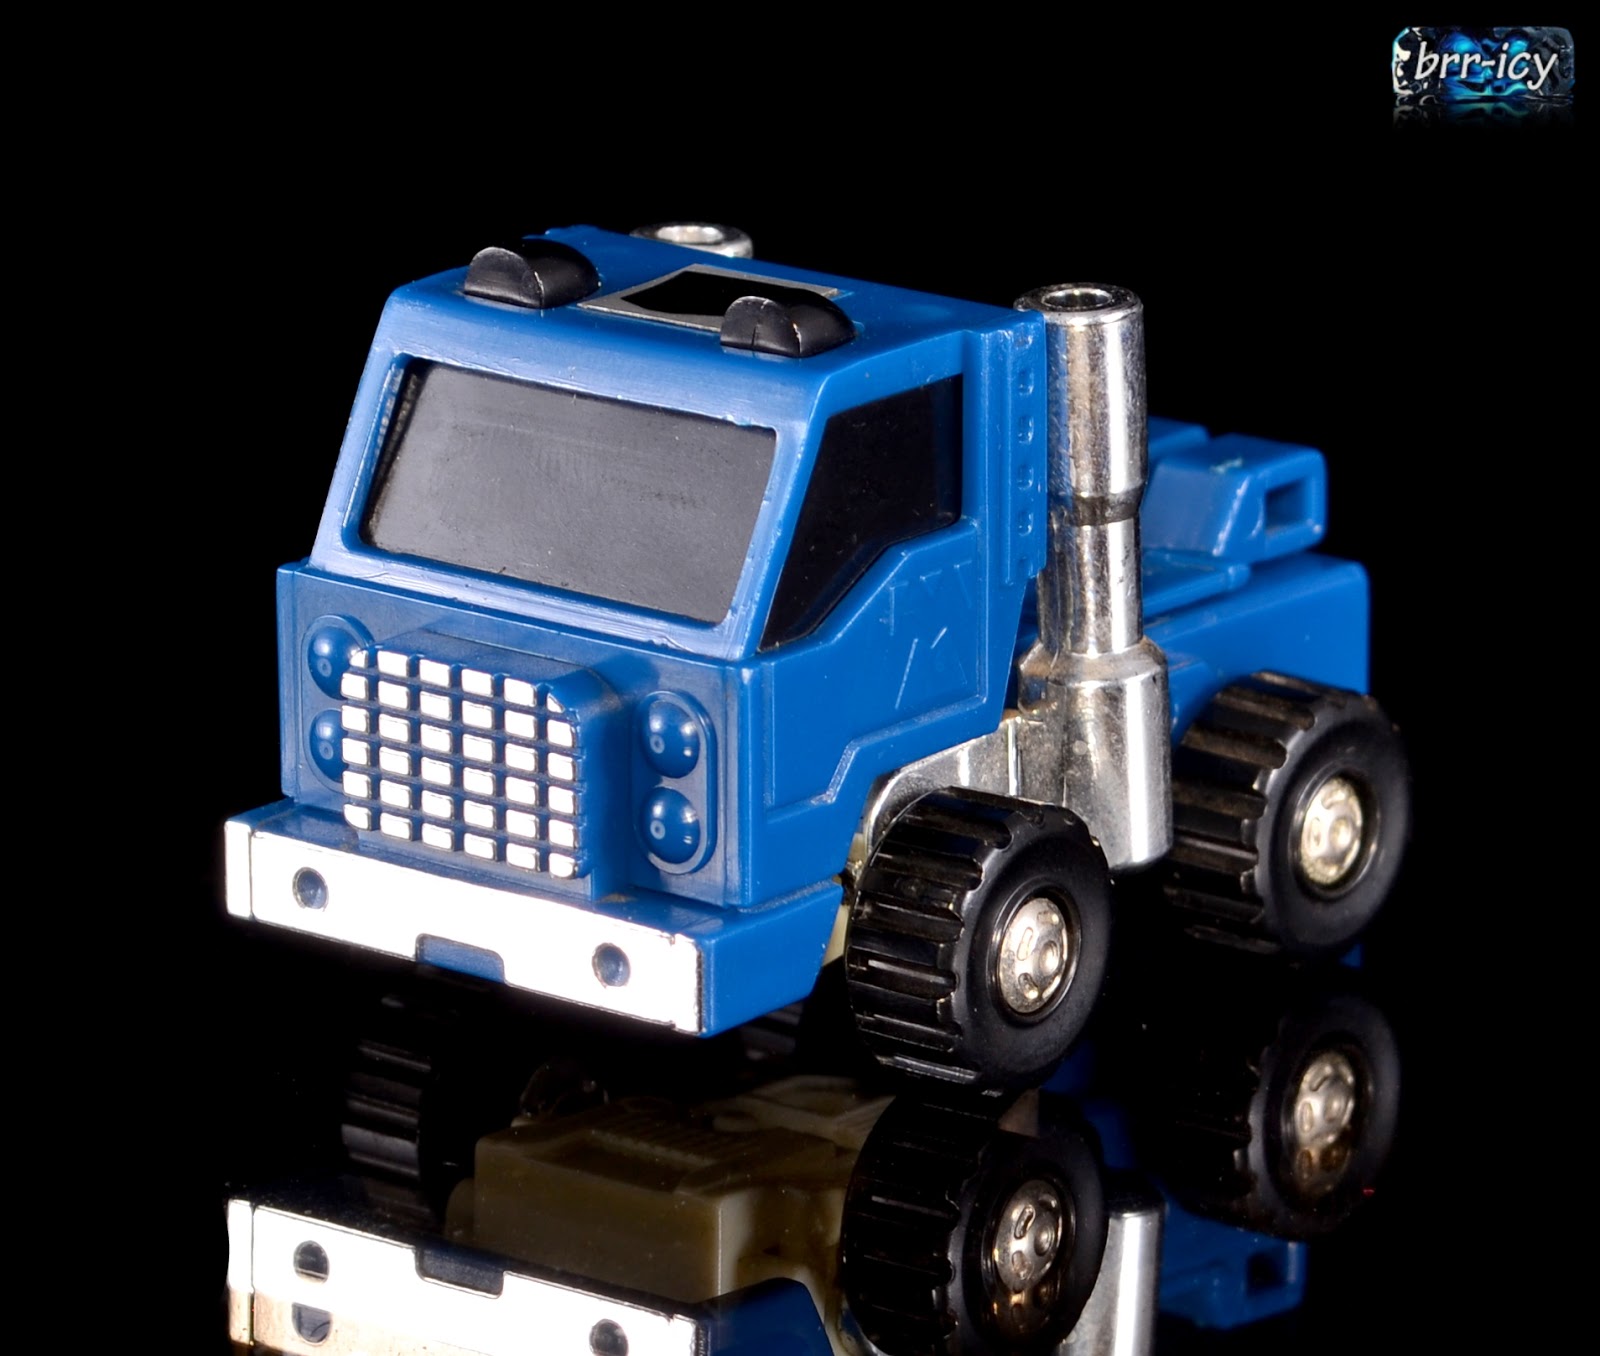 Brr-icy's Transformers Reviews: 1986 Minibots: Hubcap, Outback, Pipes ...